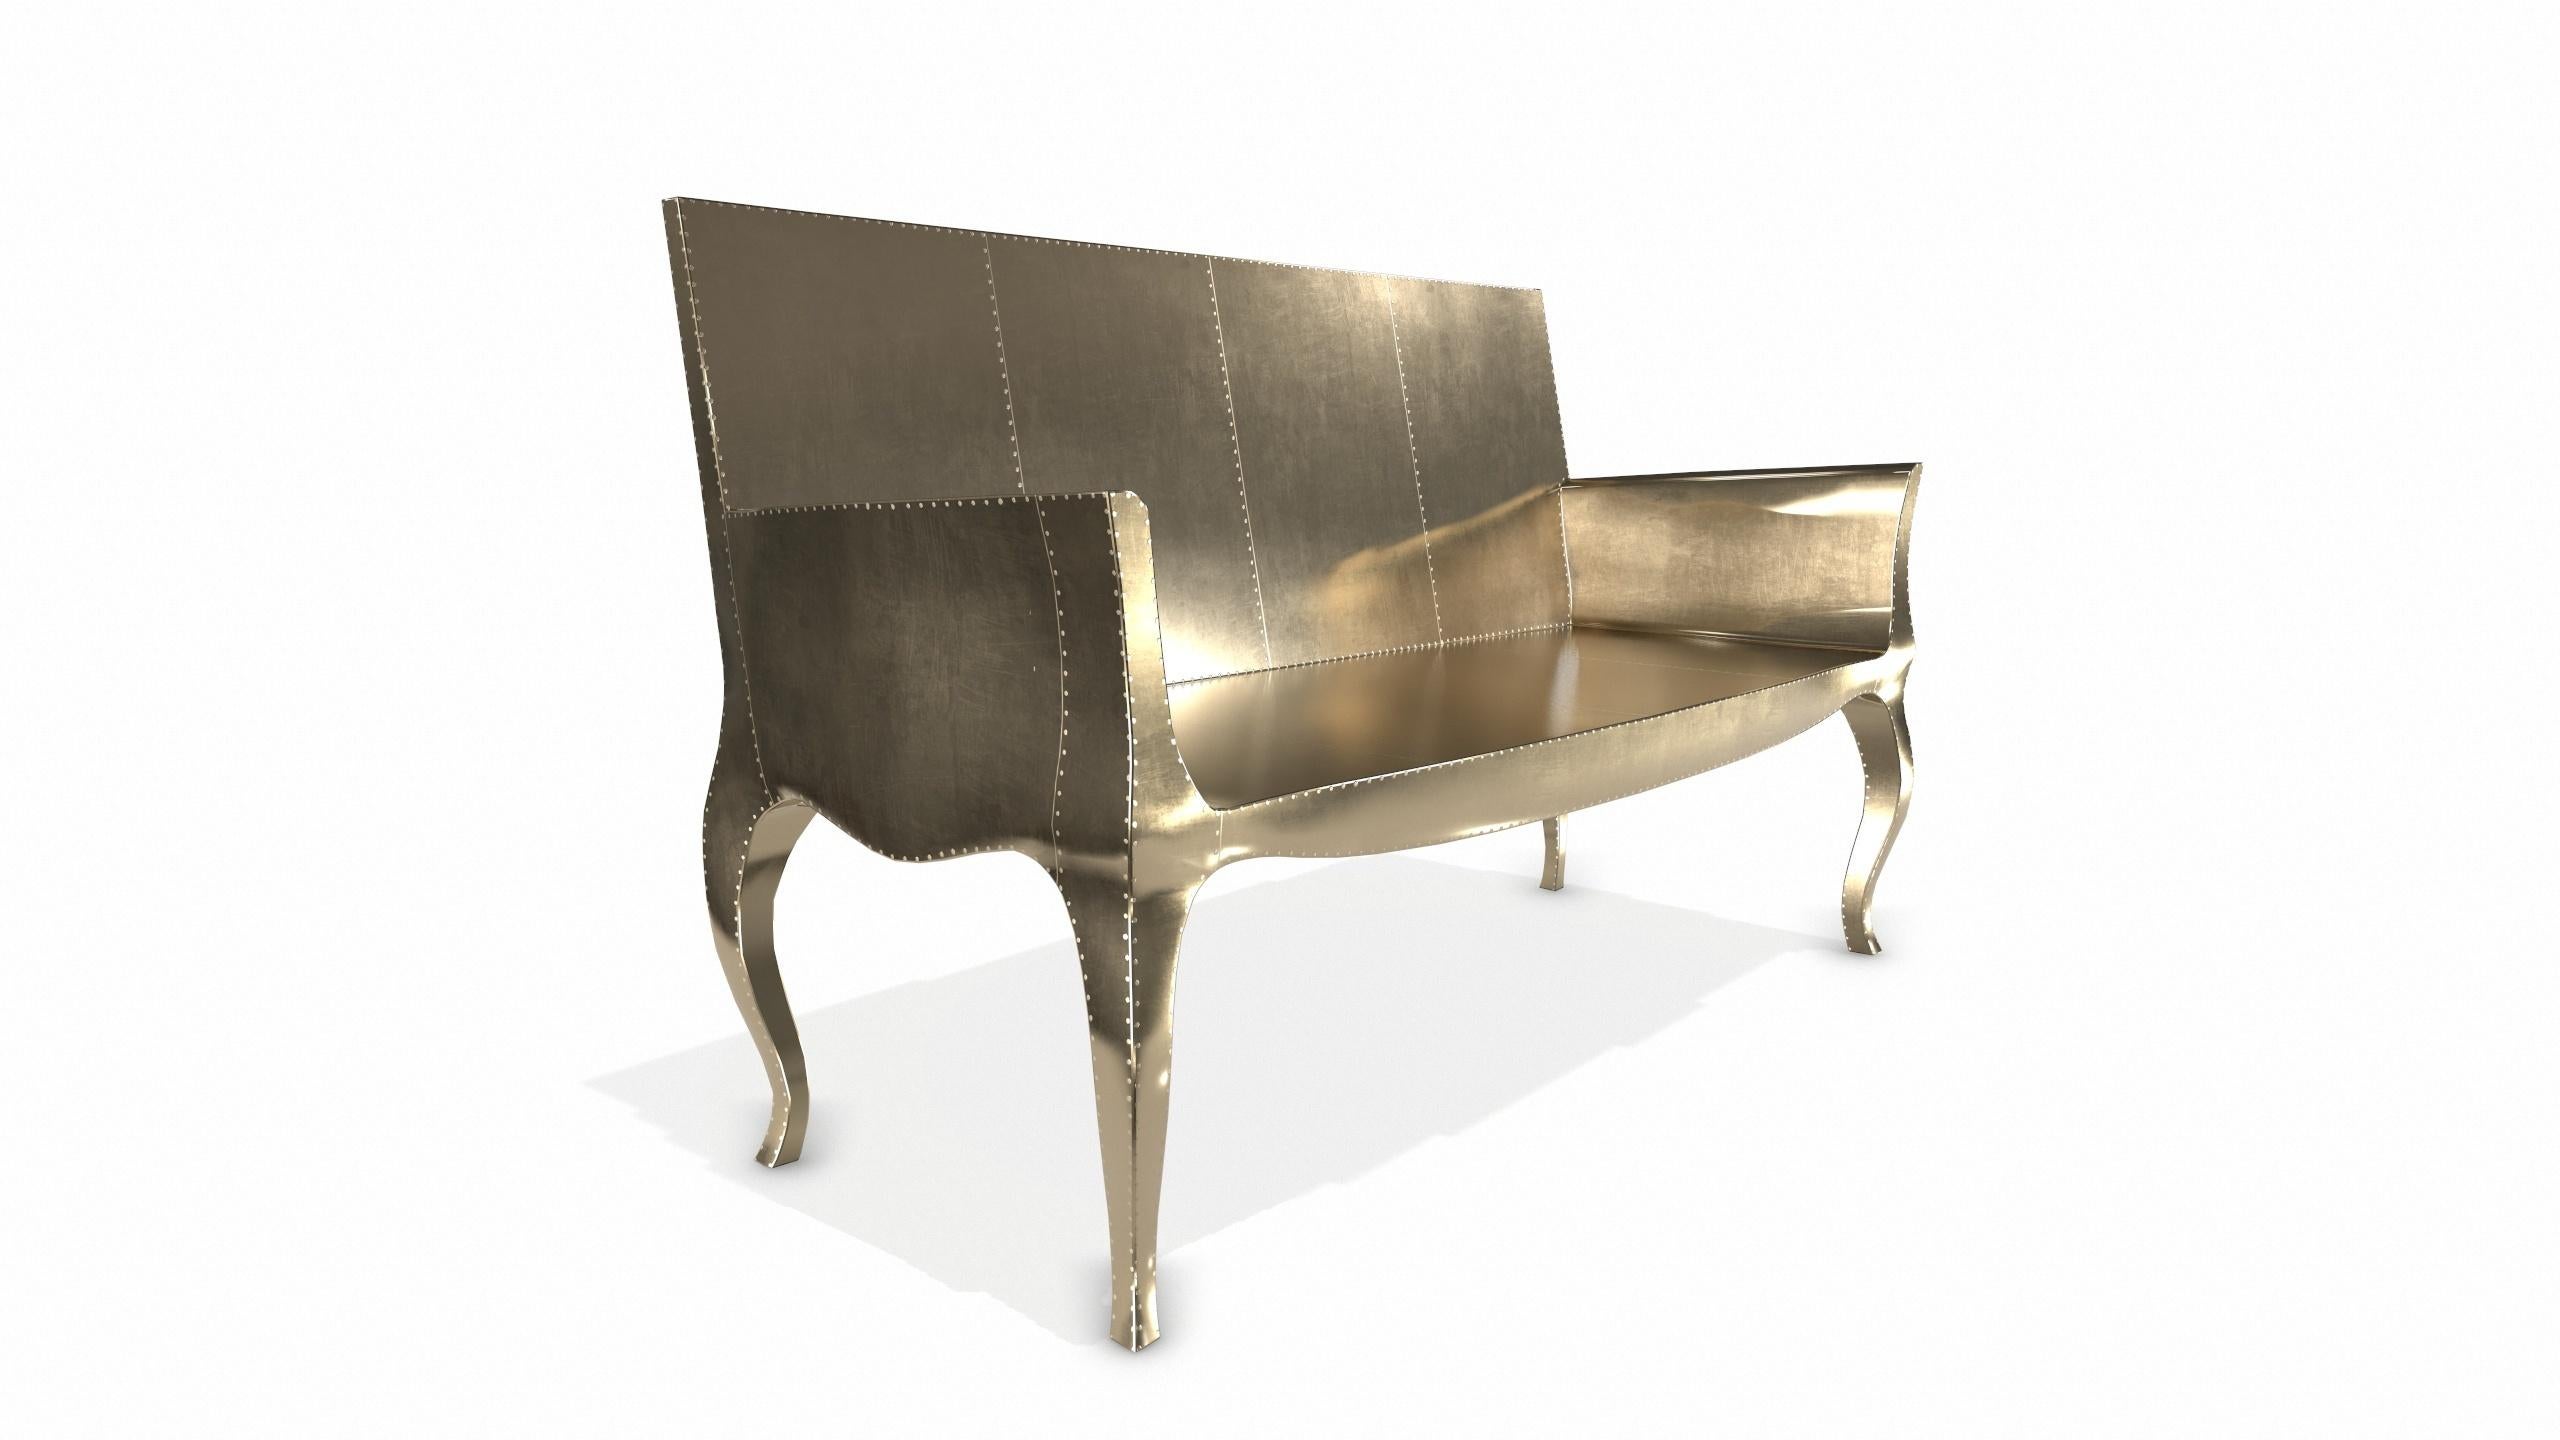 Louise Settee Art Deco Settees in Smooth Brass by Paul Mathieu for S Odegard In New Condition For Sale In New York, NY